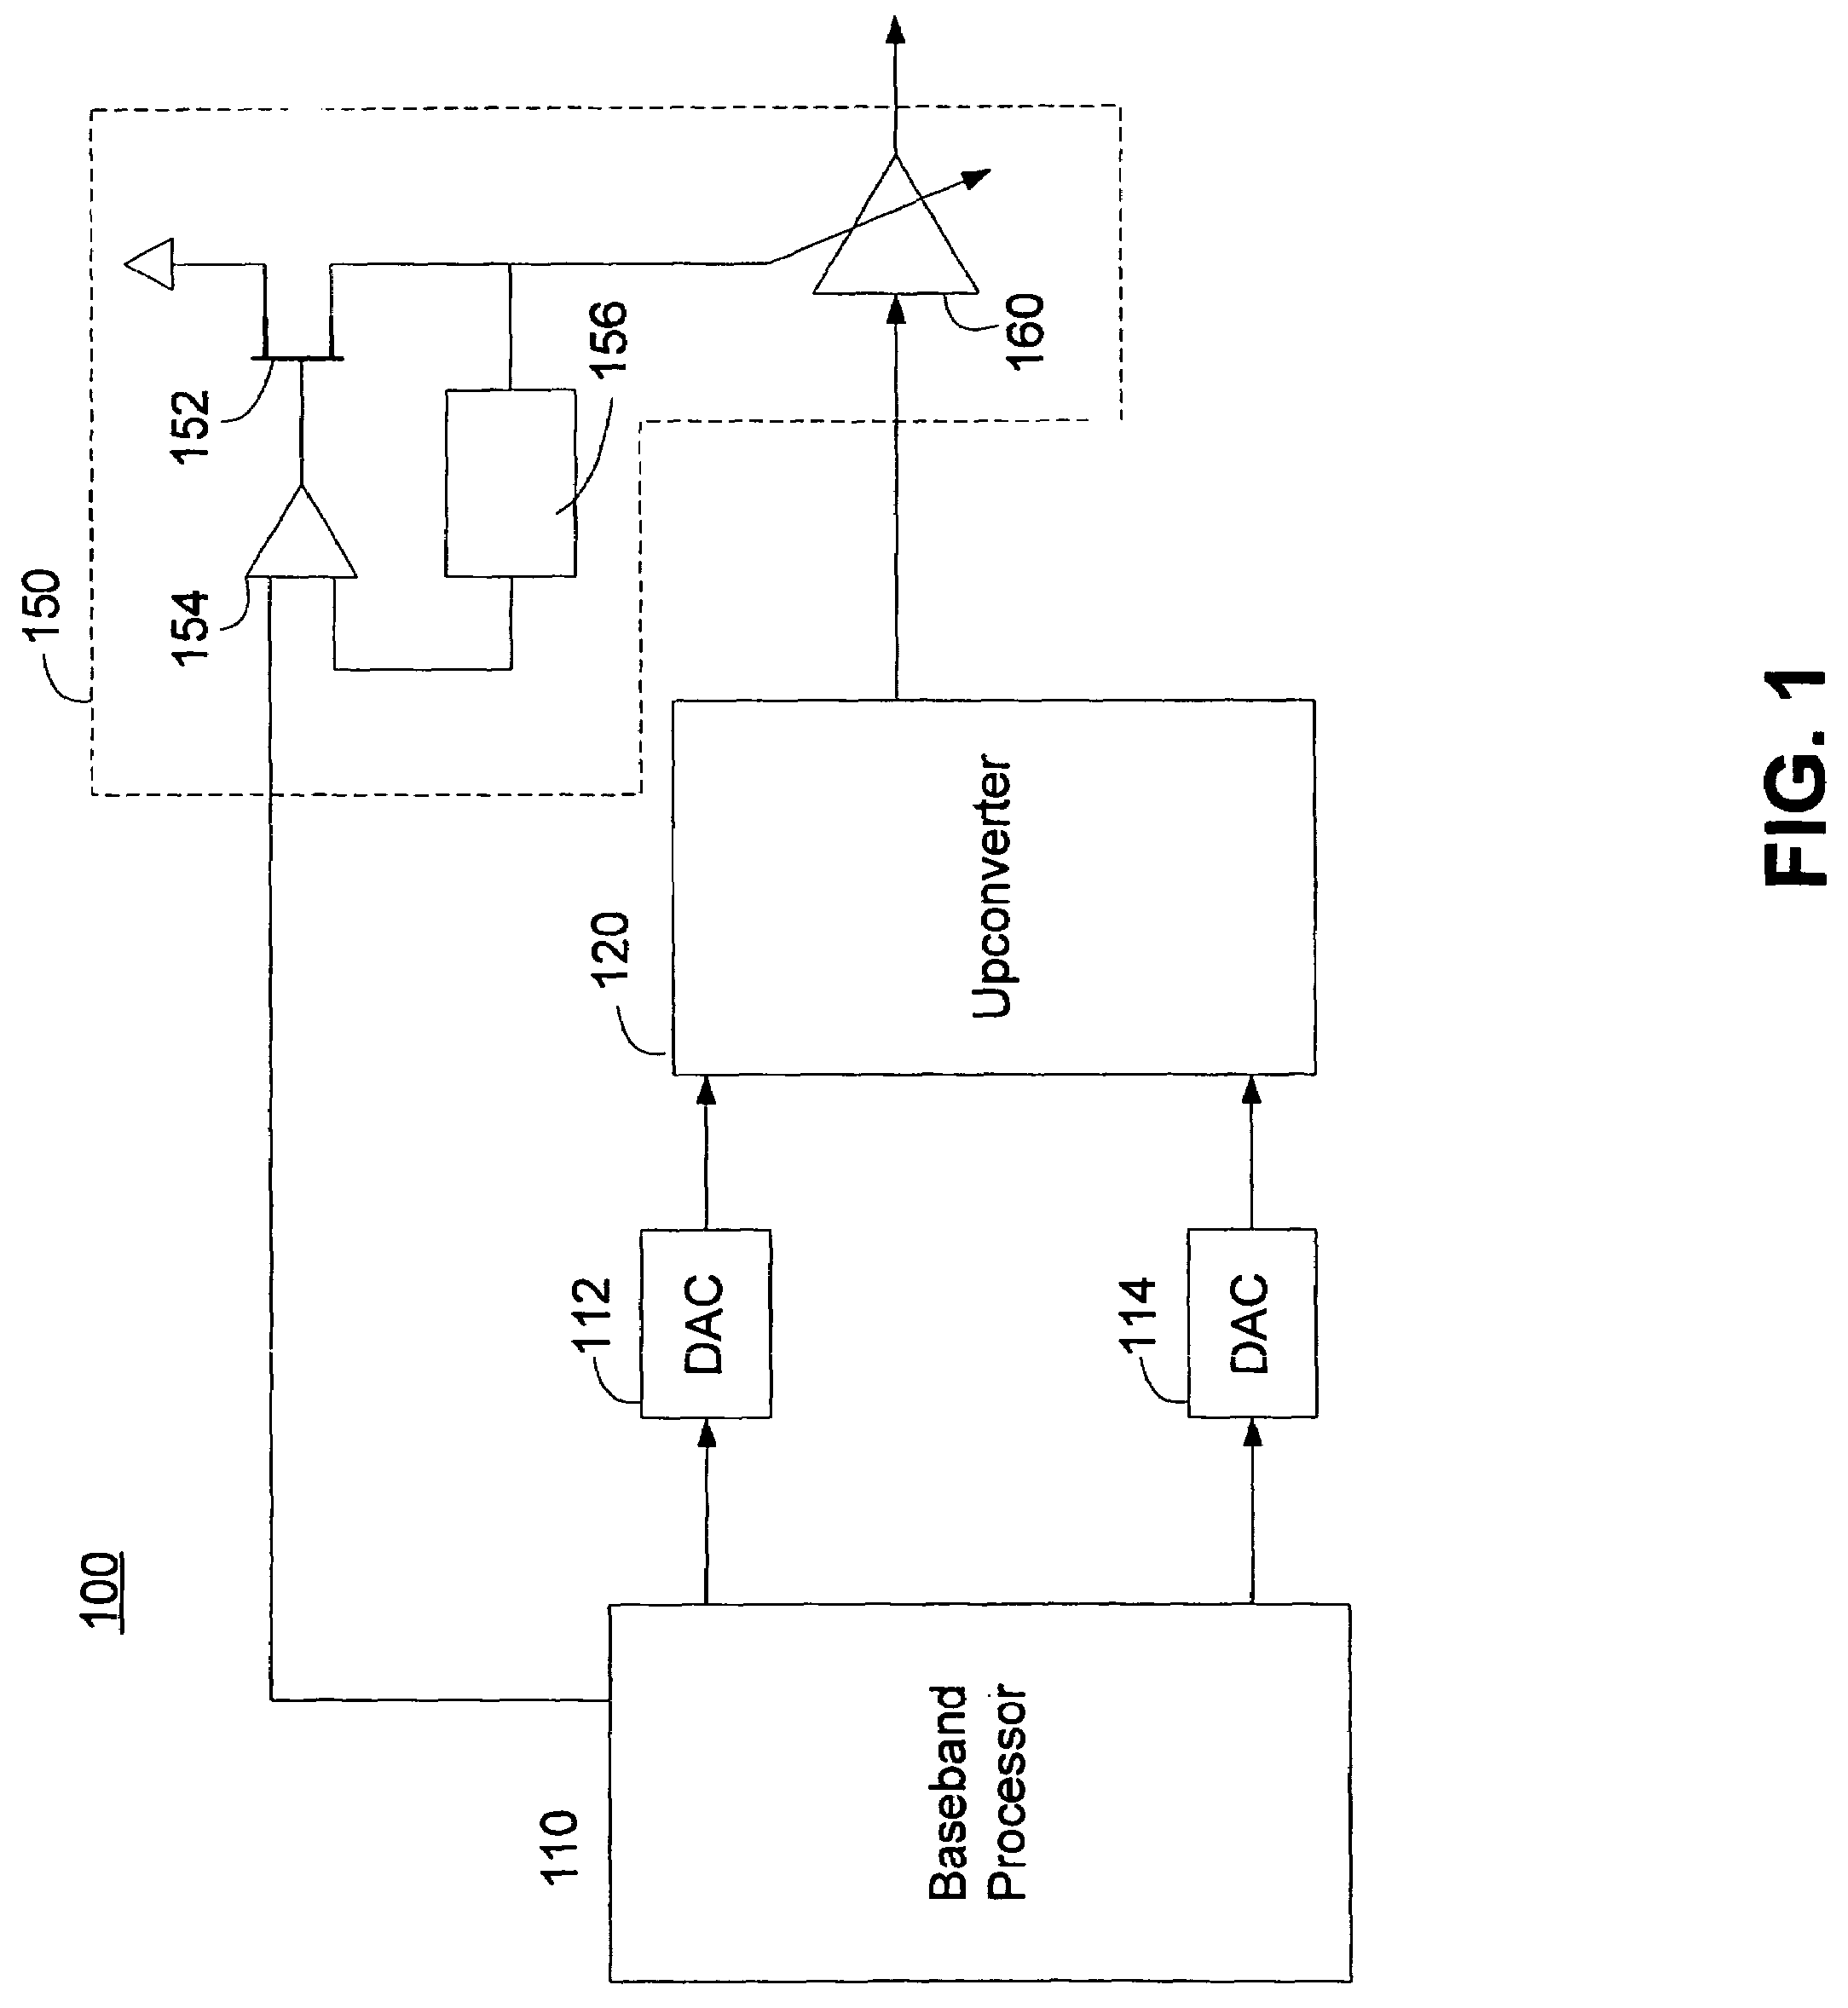 Amplifier predistortion and autocalibration method and apparatus